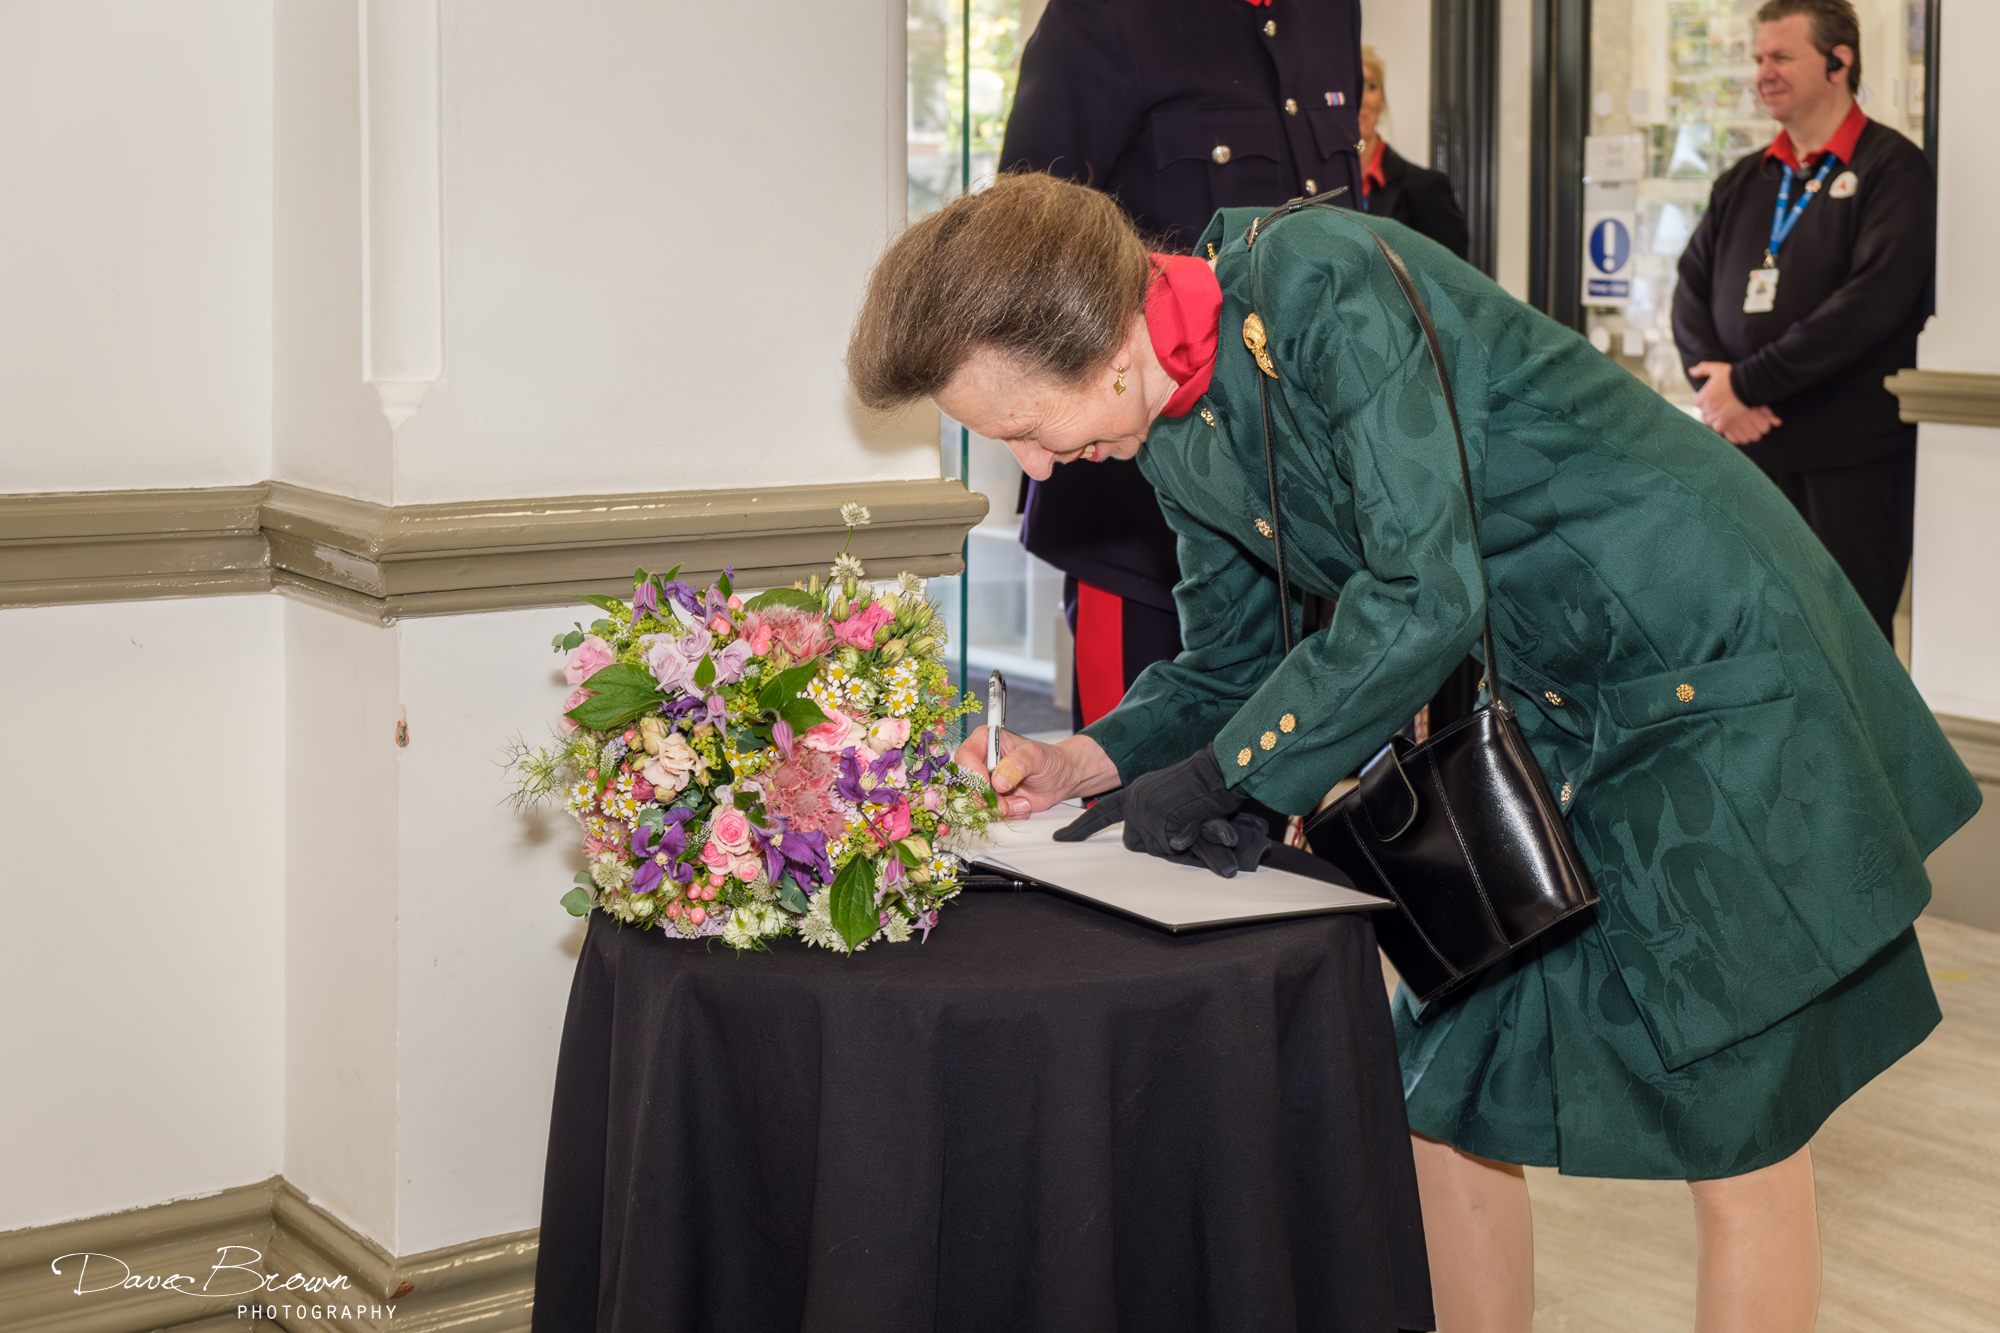 Princess Anne at The Atkinson in Southport. Photo by Dave Brown Photography 